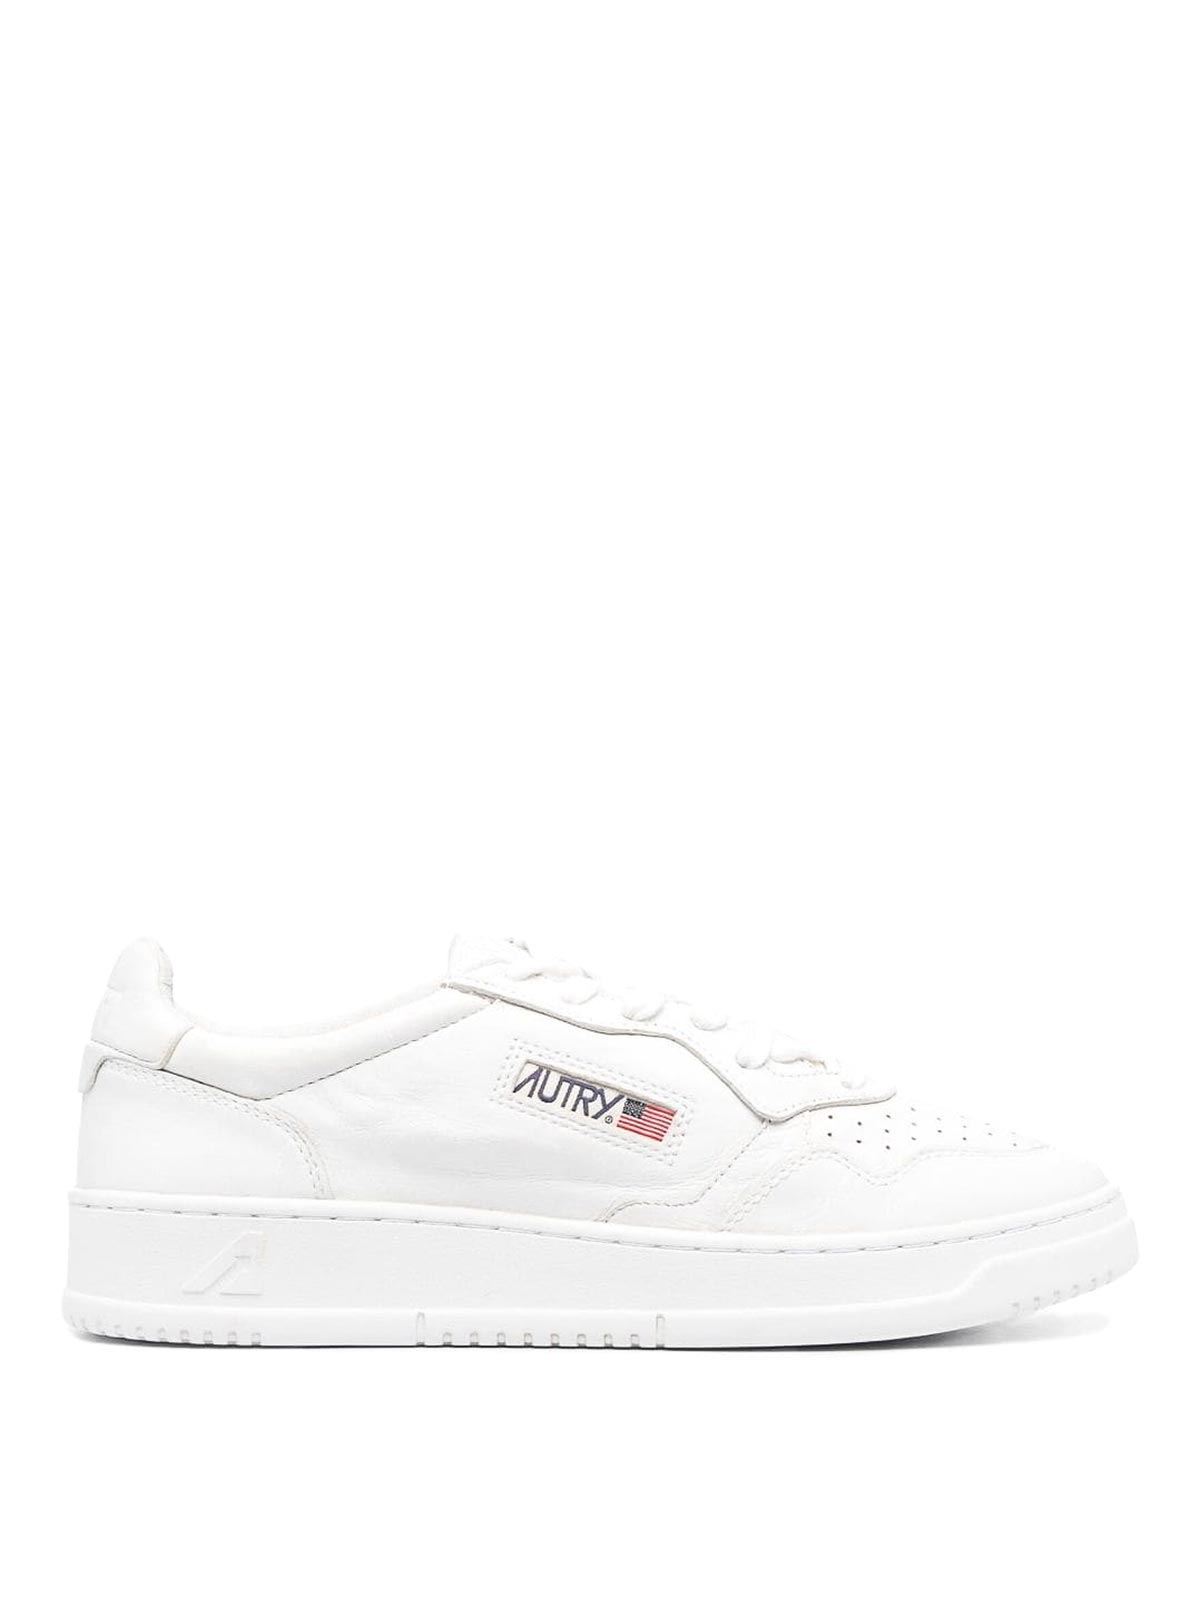 Autry Medalist Low Man Sneakers In White